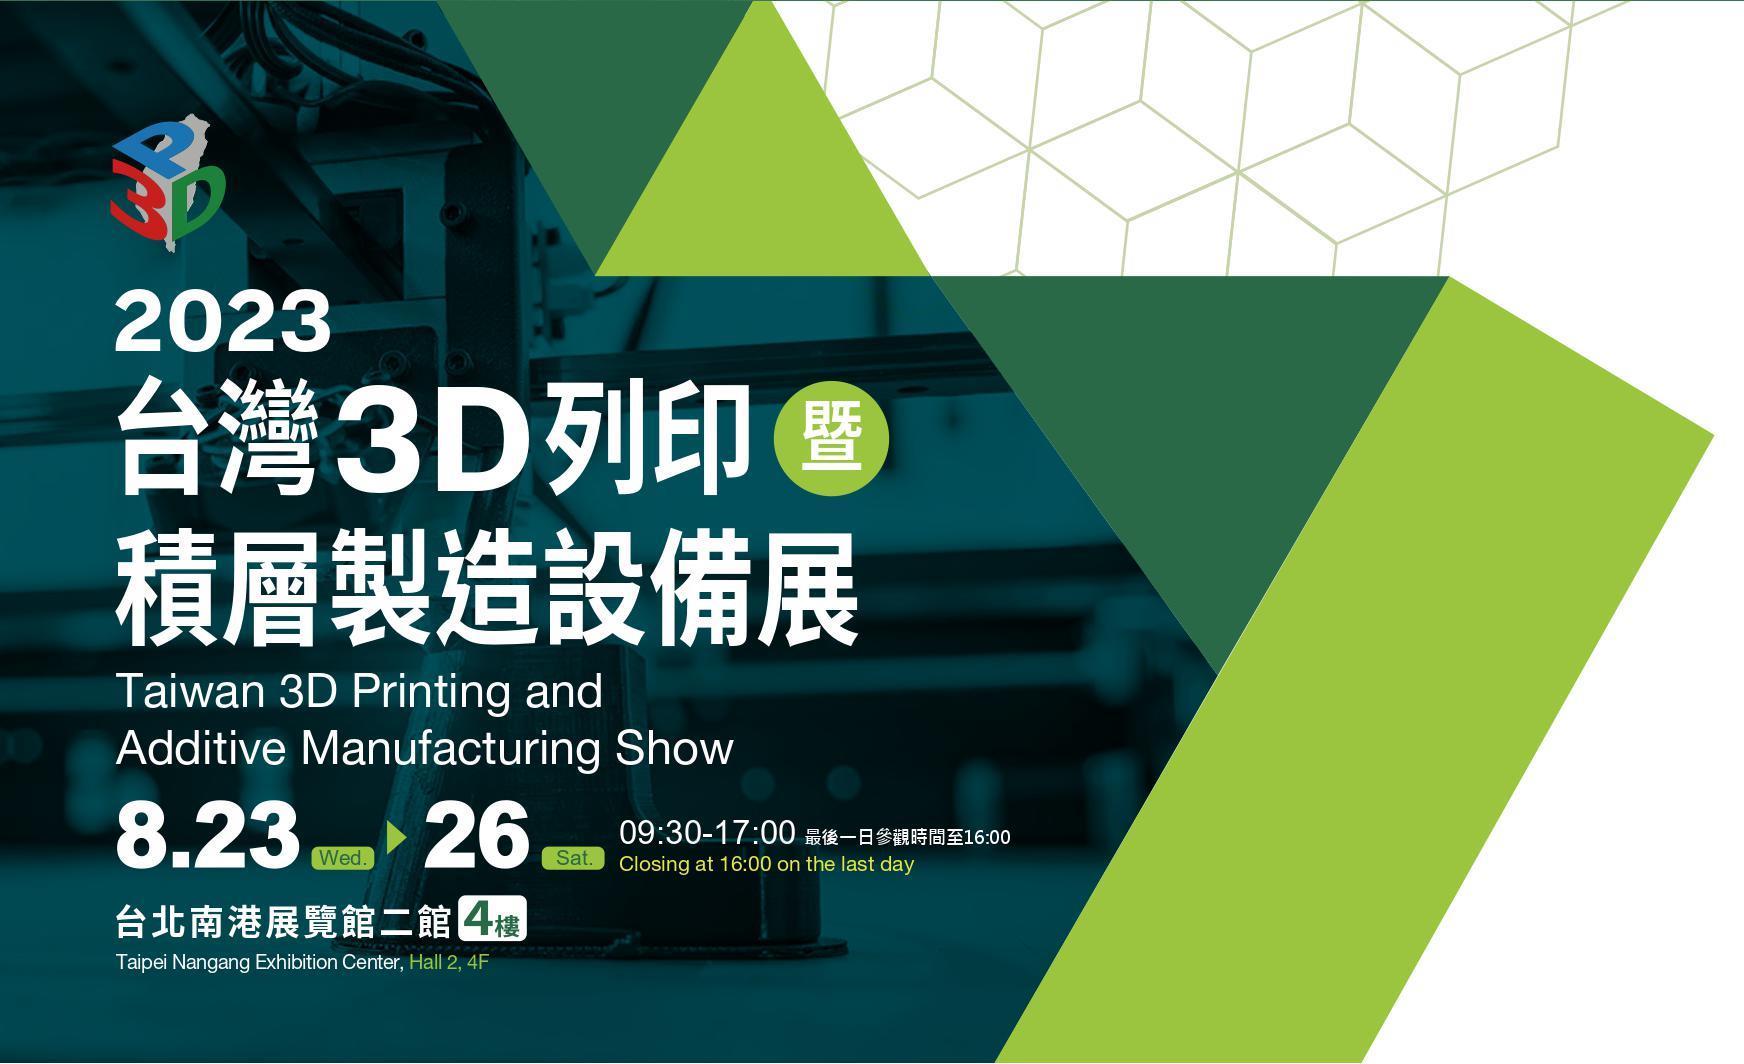 2023 Taiwan 3D Printing and Additive Manufacturing Show